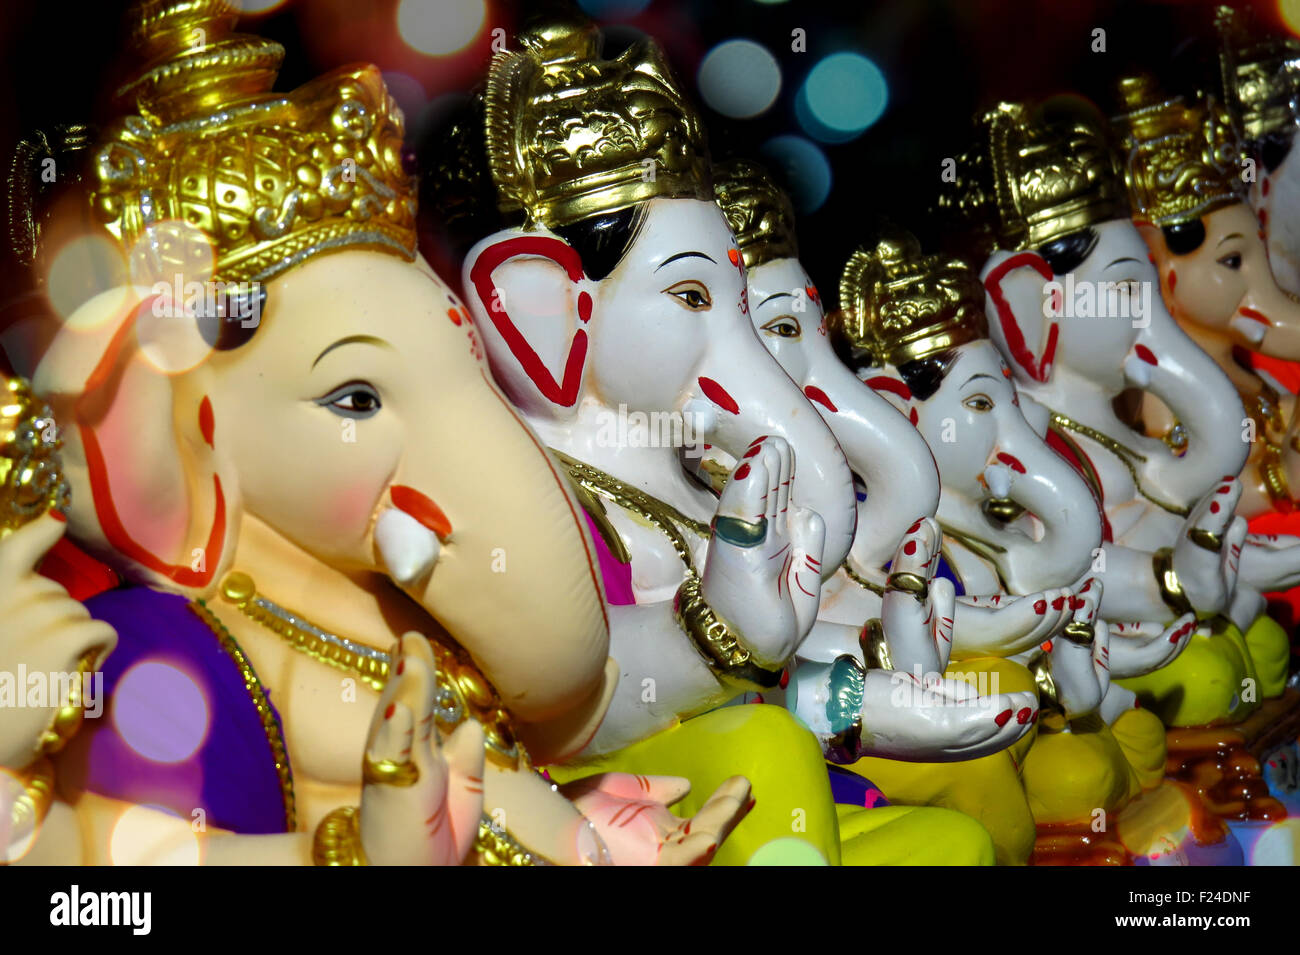 Ganesha Idols with different moods and poses for sale during ...